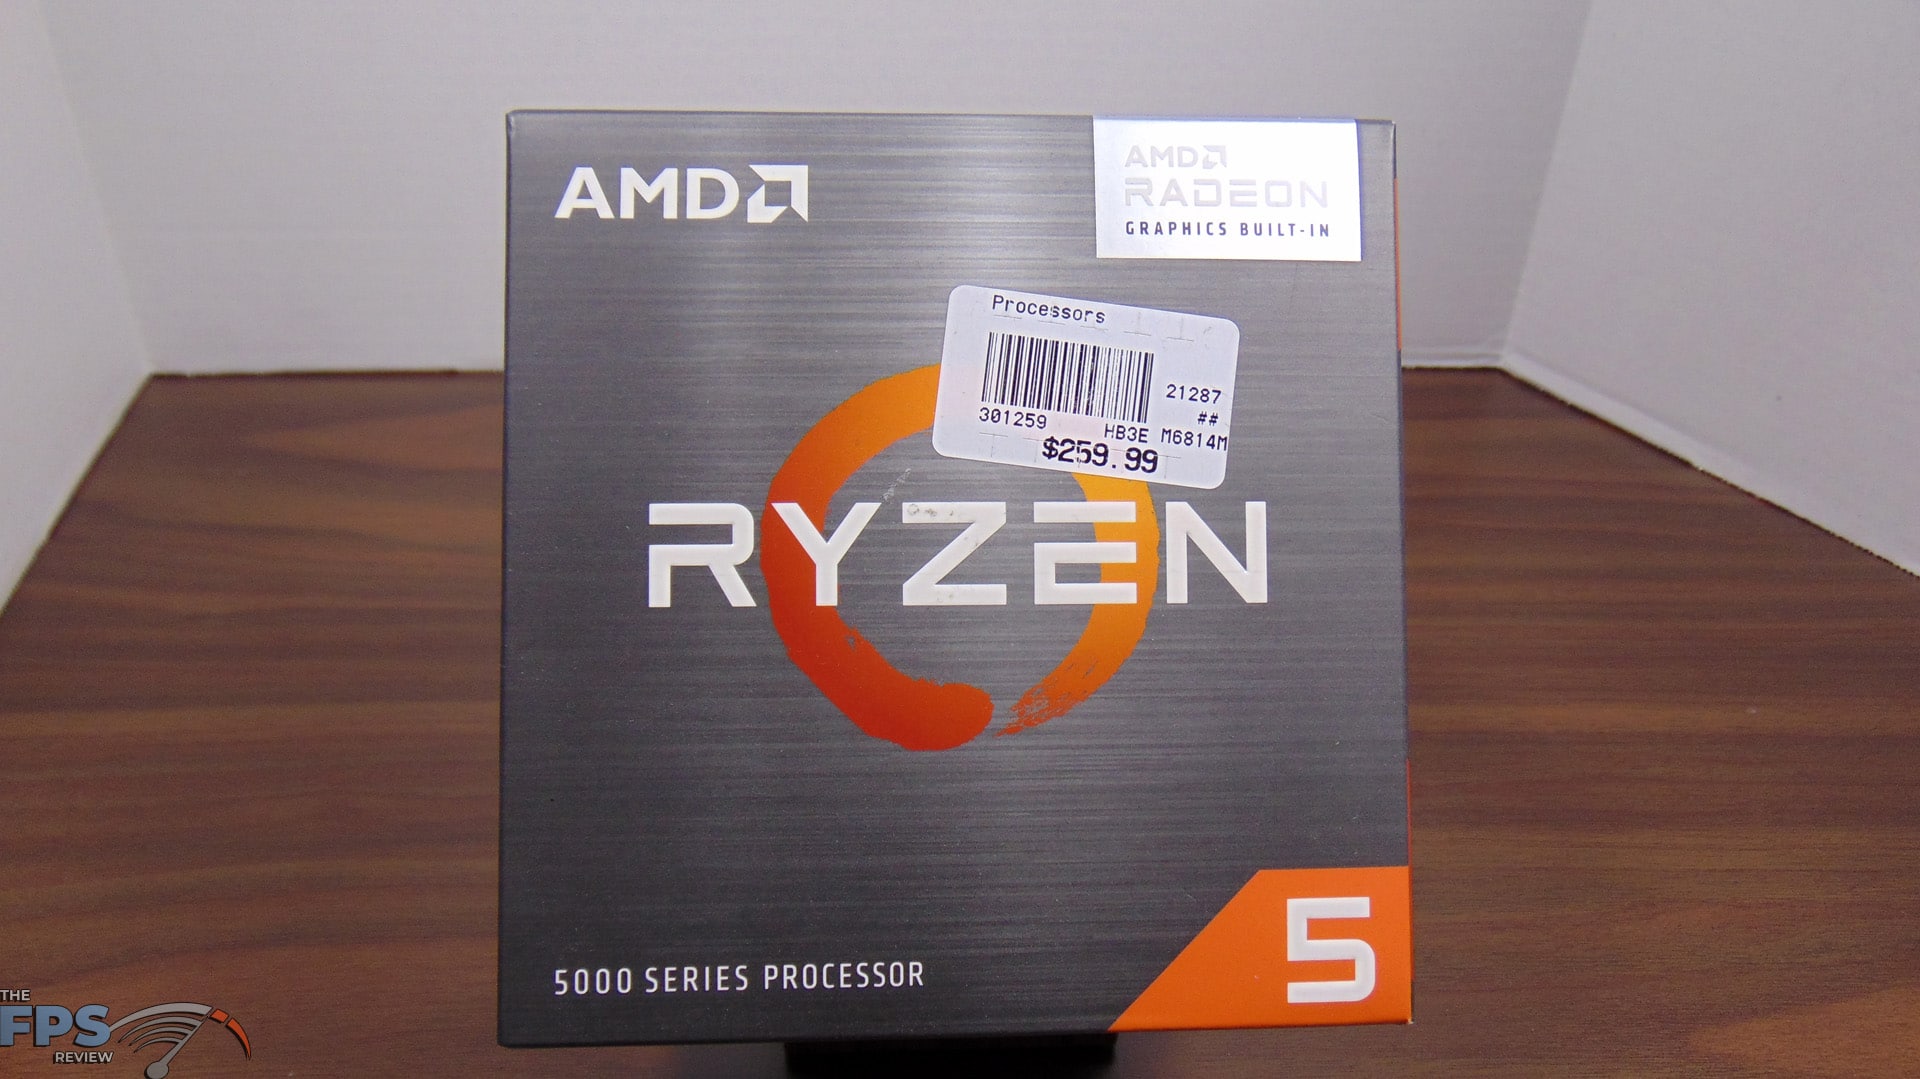 AMD Ryzen 5 5600G Processor Overview: Gaming Graphics Card Included